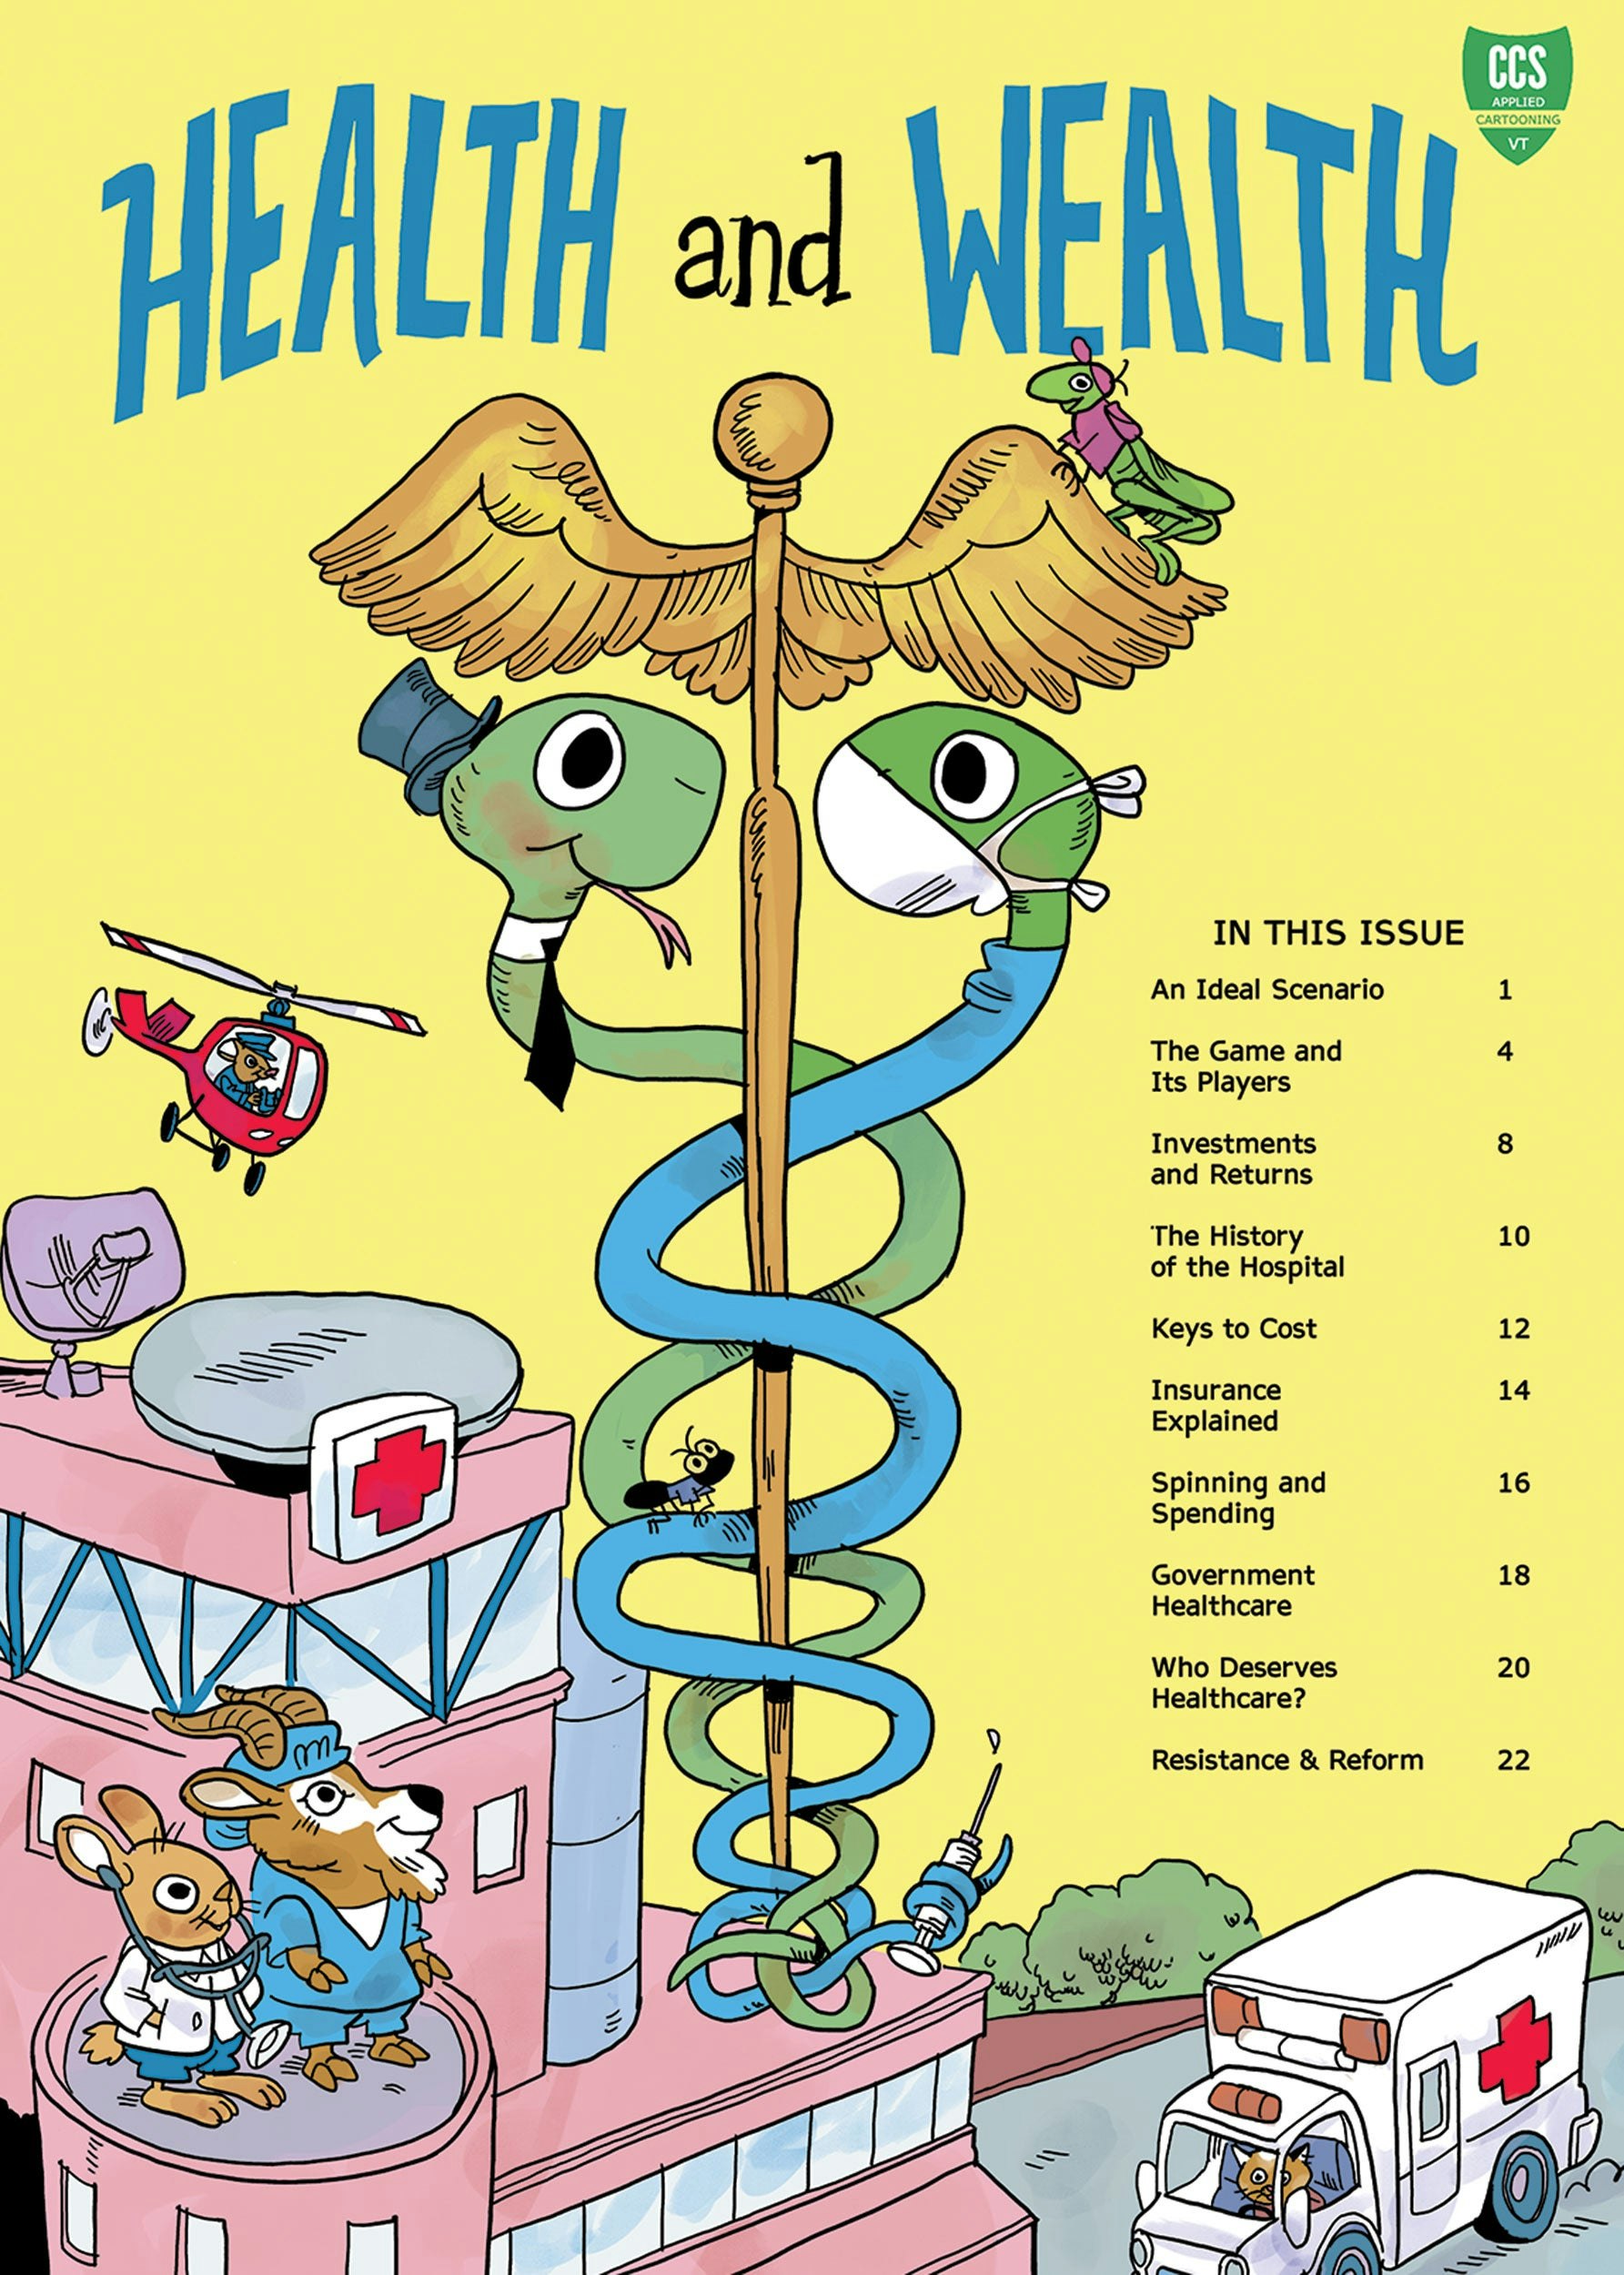 Cover image of the Health and Wealth comic book